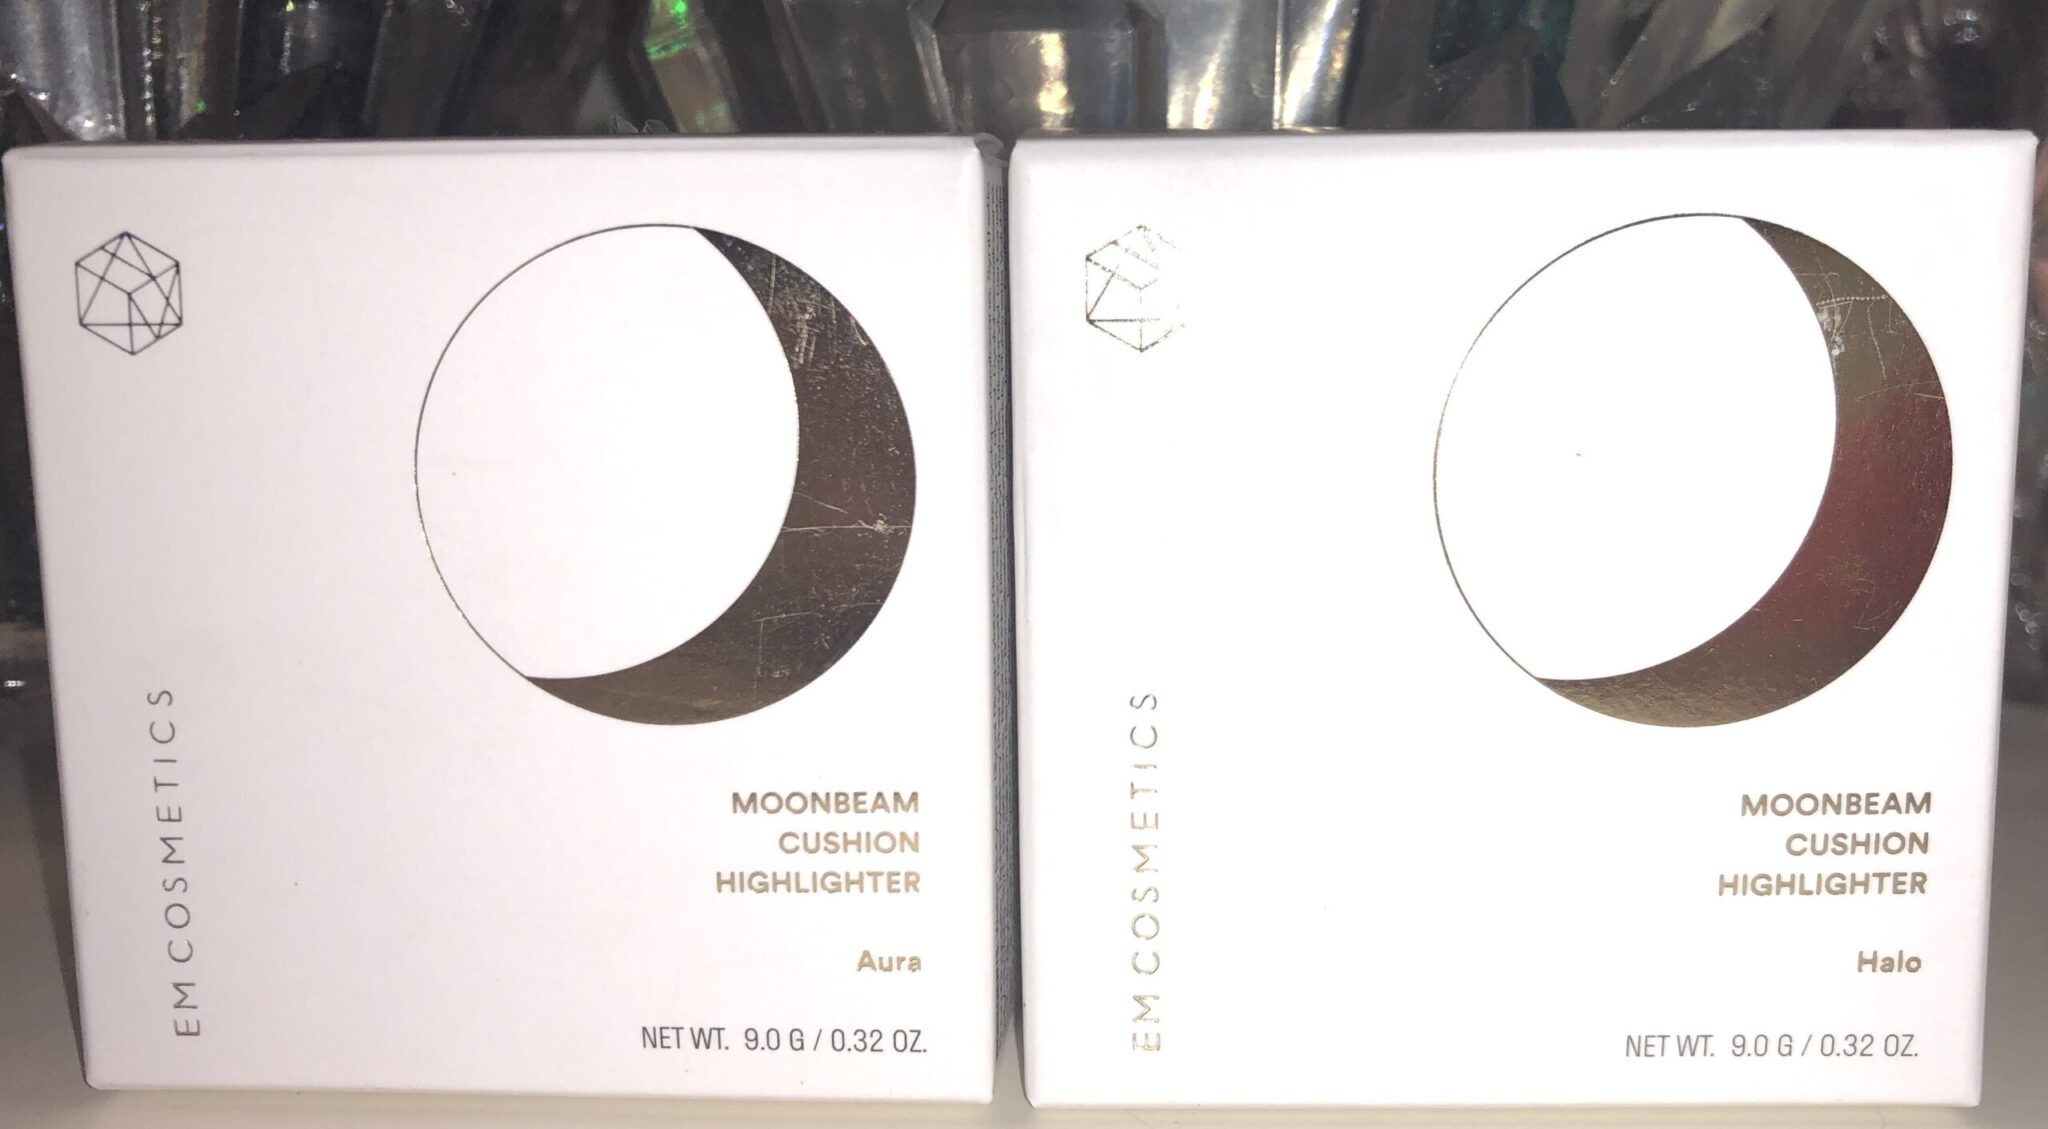 EM COSMETICS MOONBEAM CUSHION HIGHLIGHTER OUTER BOXES